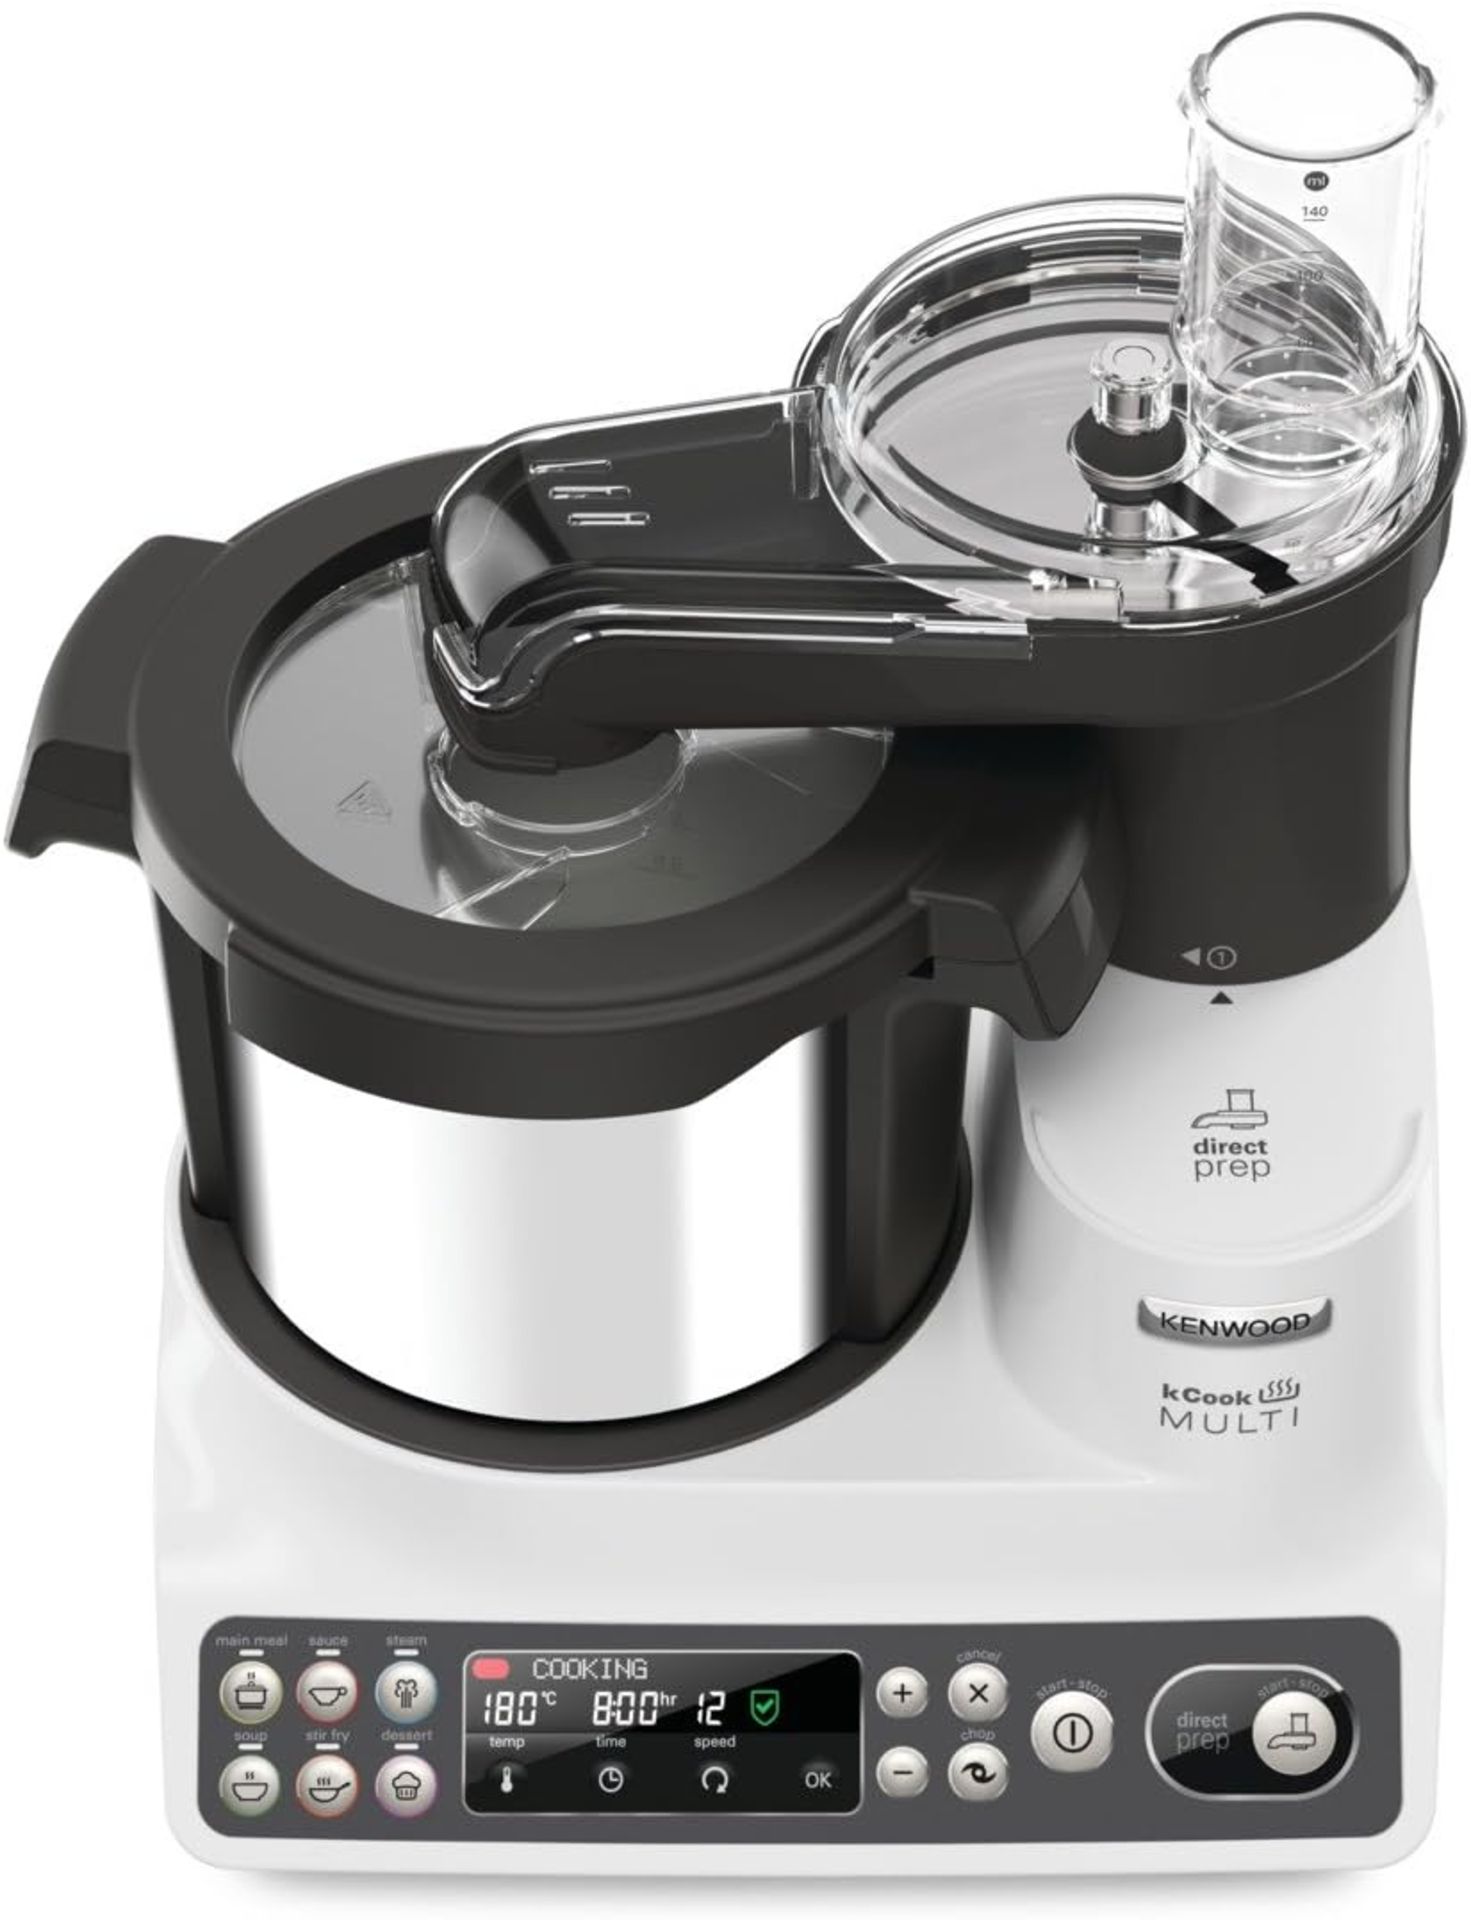 RRP £611.00 Kenwood CCL450SI KCook Multi Smart Food Processor with Cooking Function and Connected